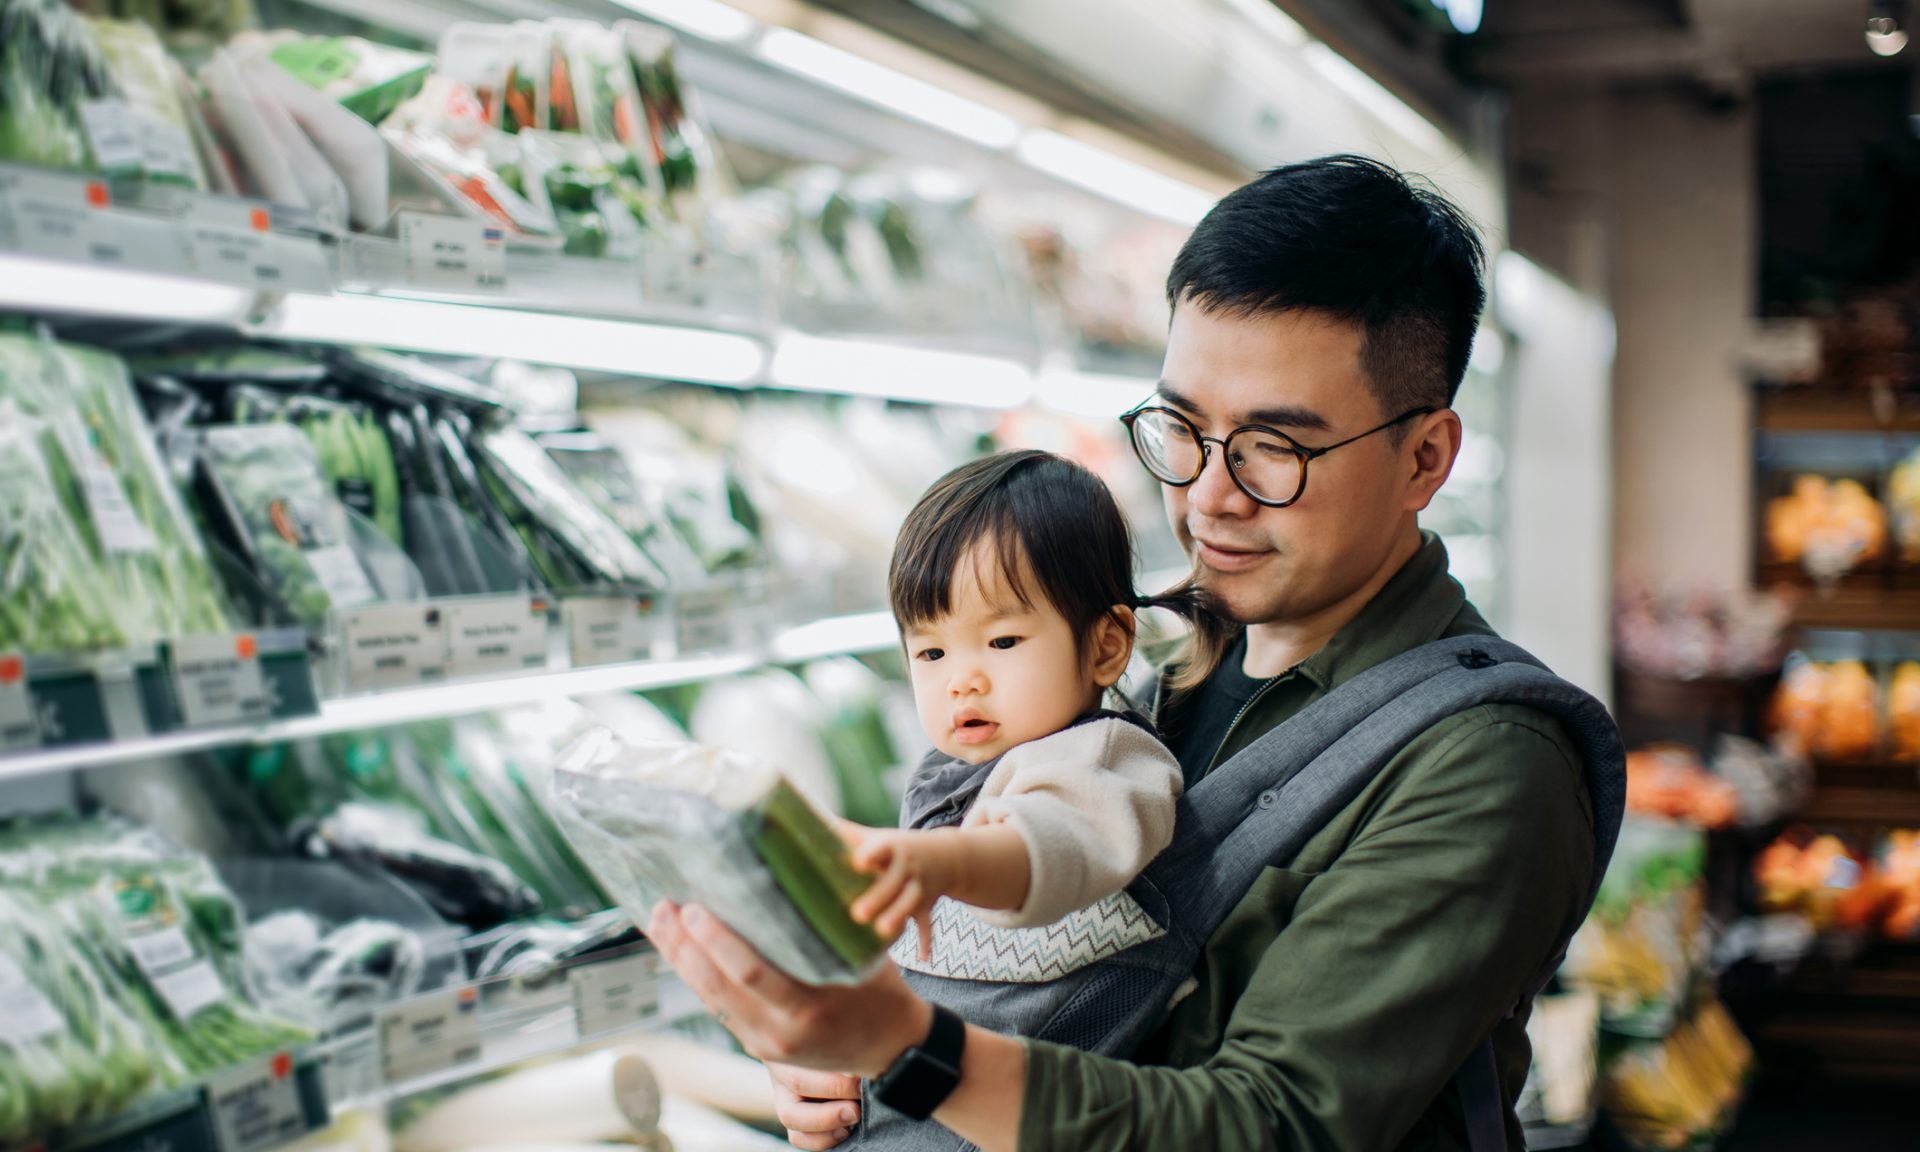 Your Guide to How Much to Spend on Groceries - NerdWallet